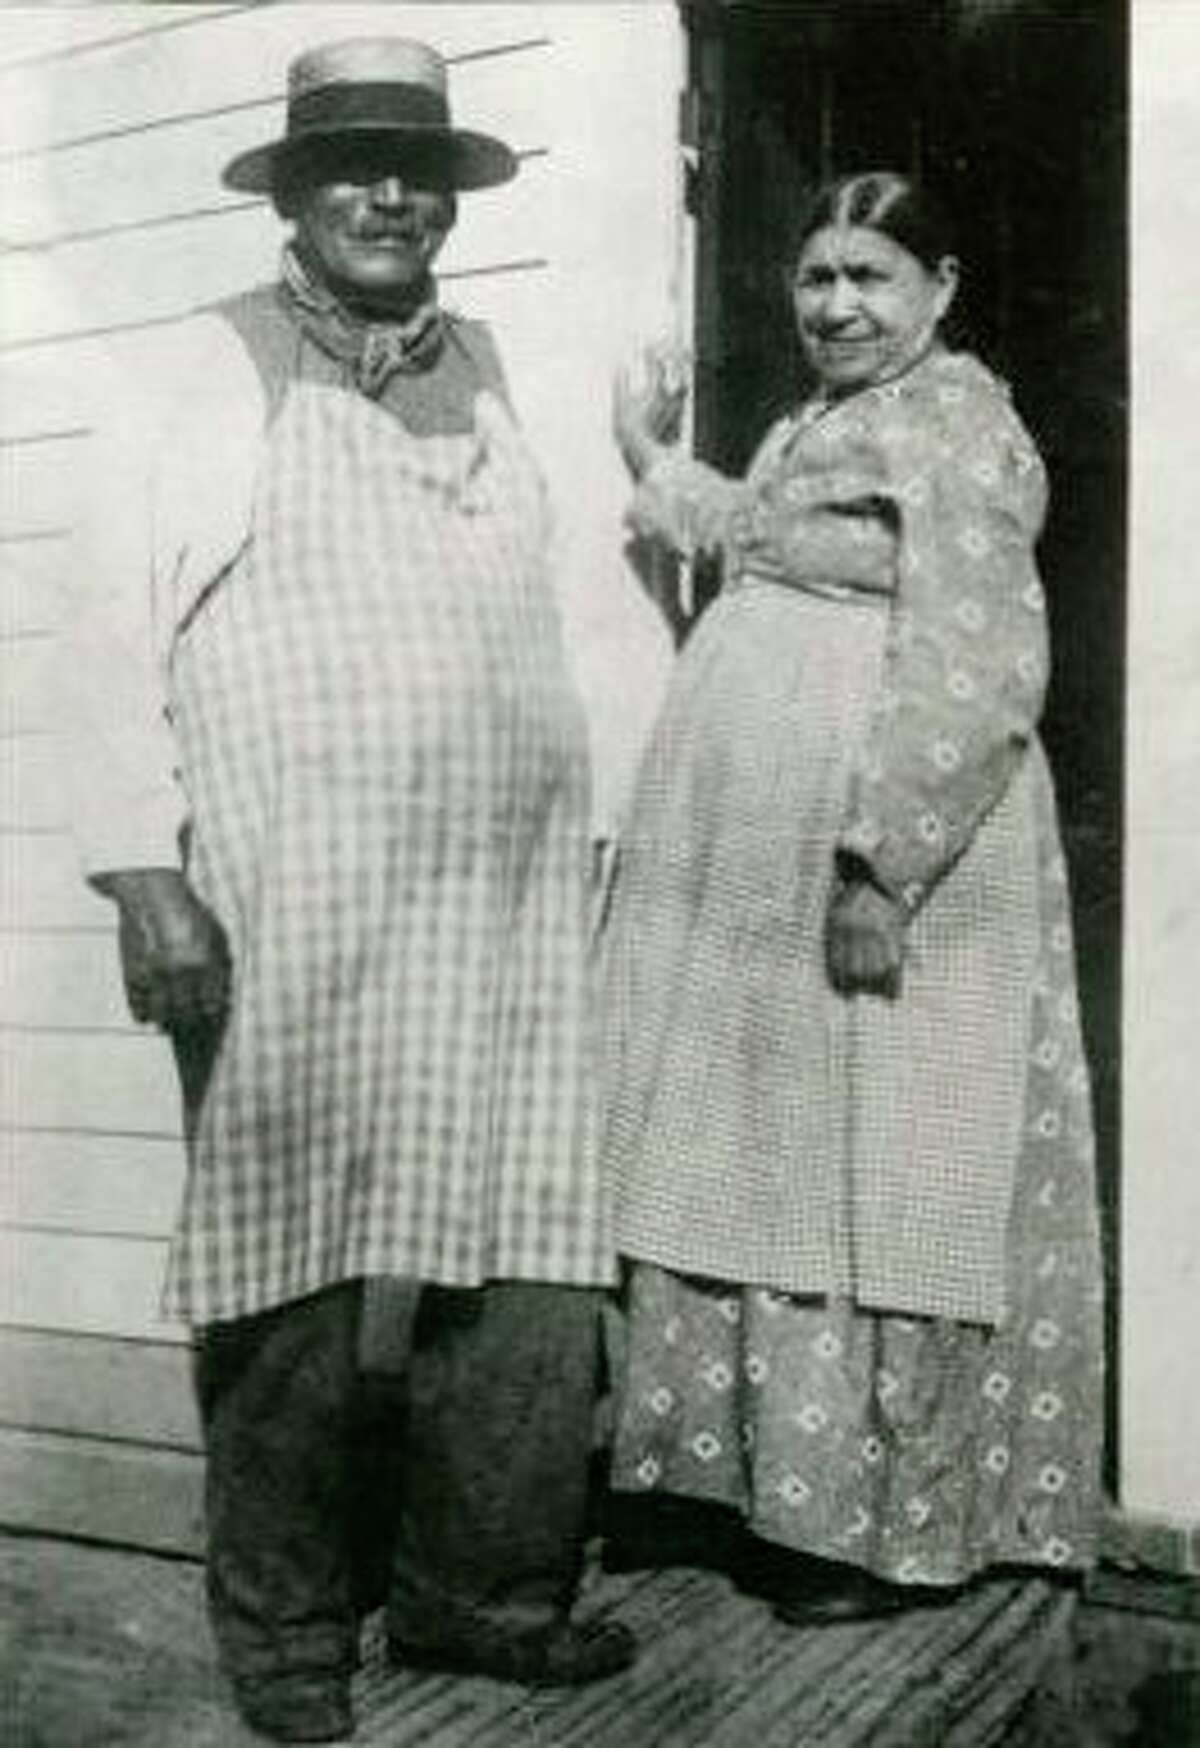 George Crum, inventor of the potato chip, and his sister-in-law "Aunt Kate" Weeks at Moon's Lake House in Saratoga Springs, New York. (Courtesy photo)